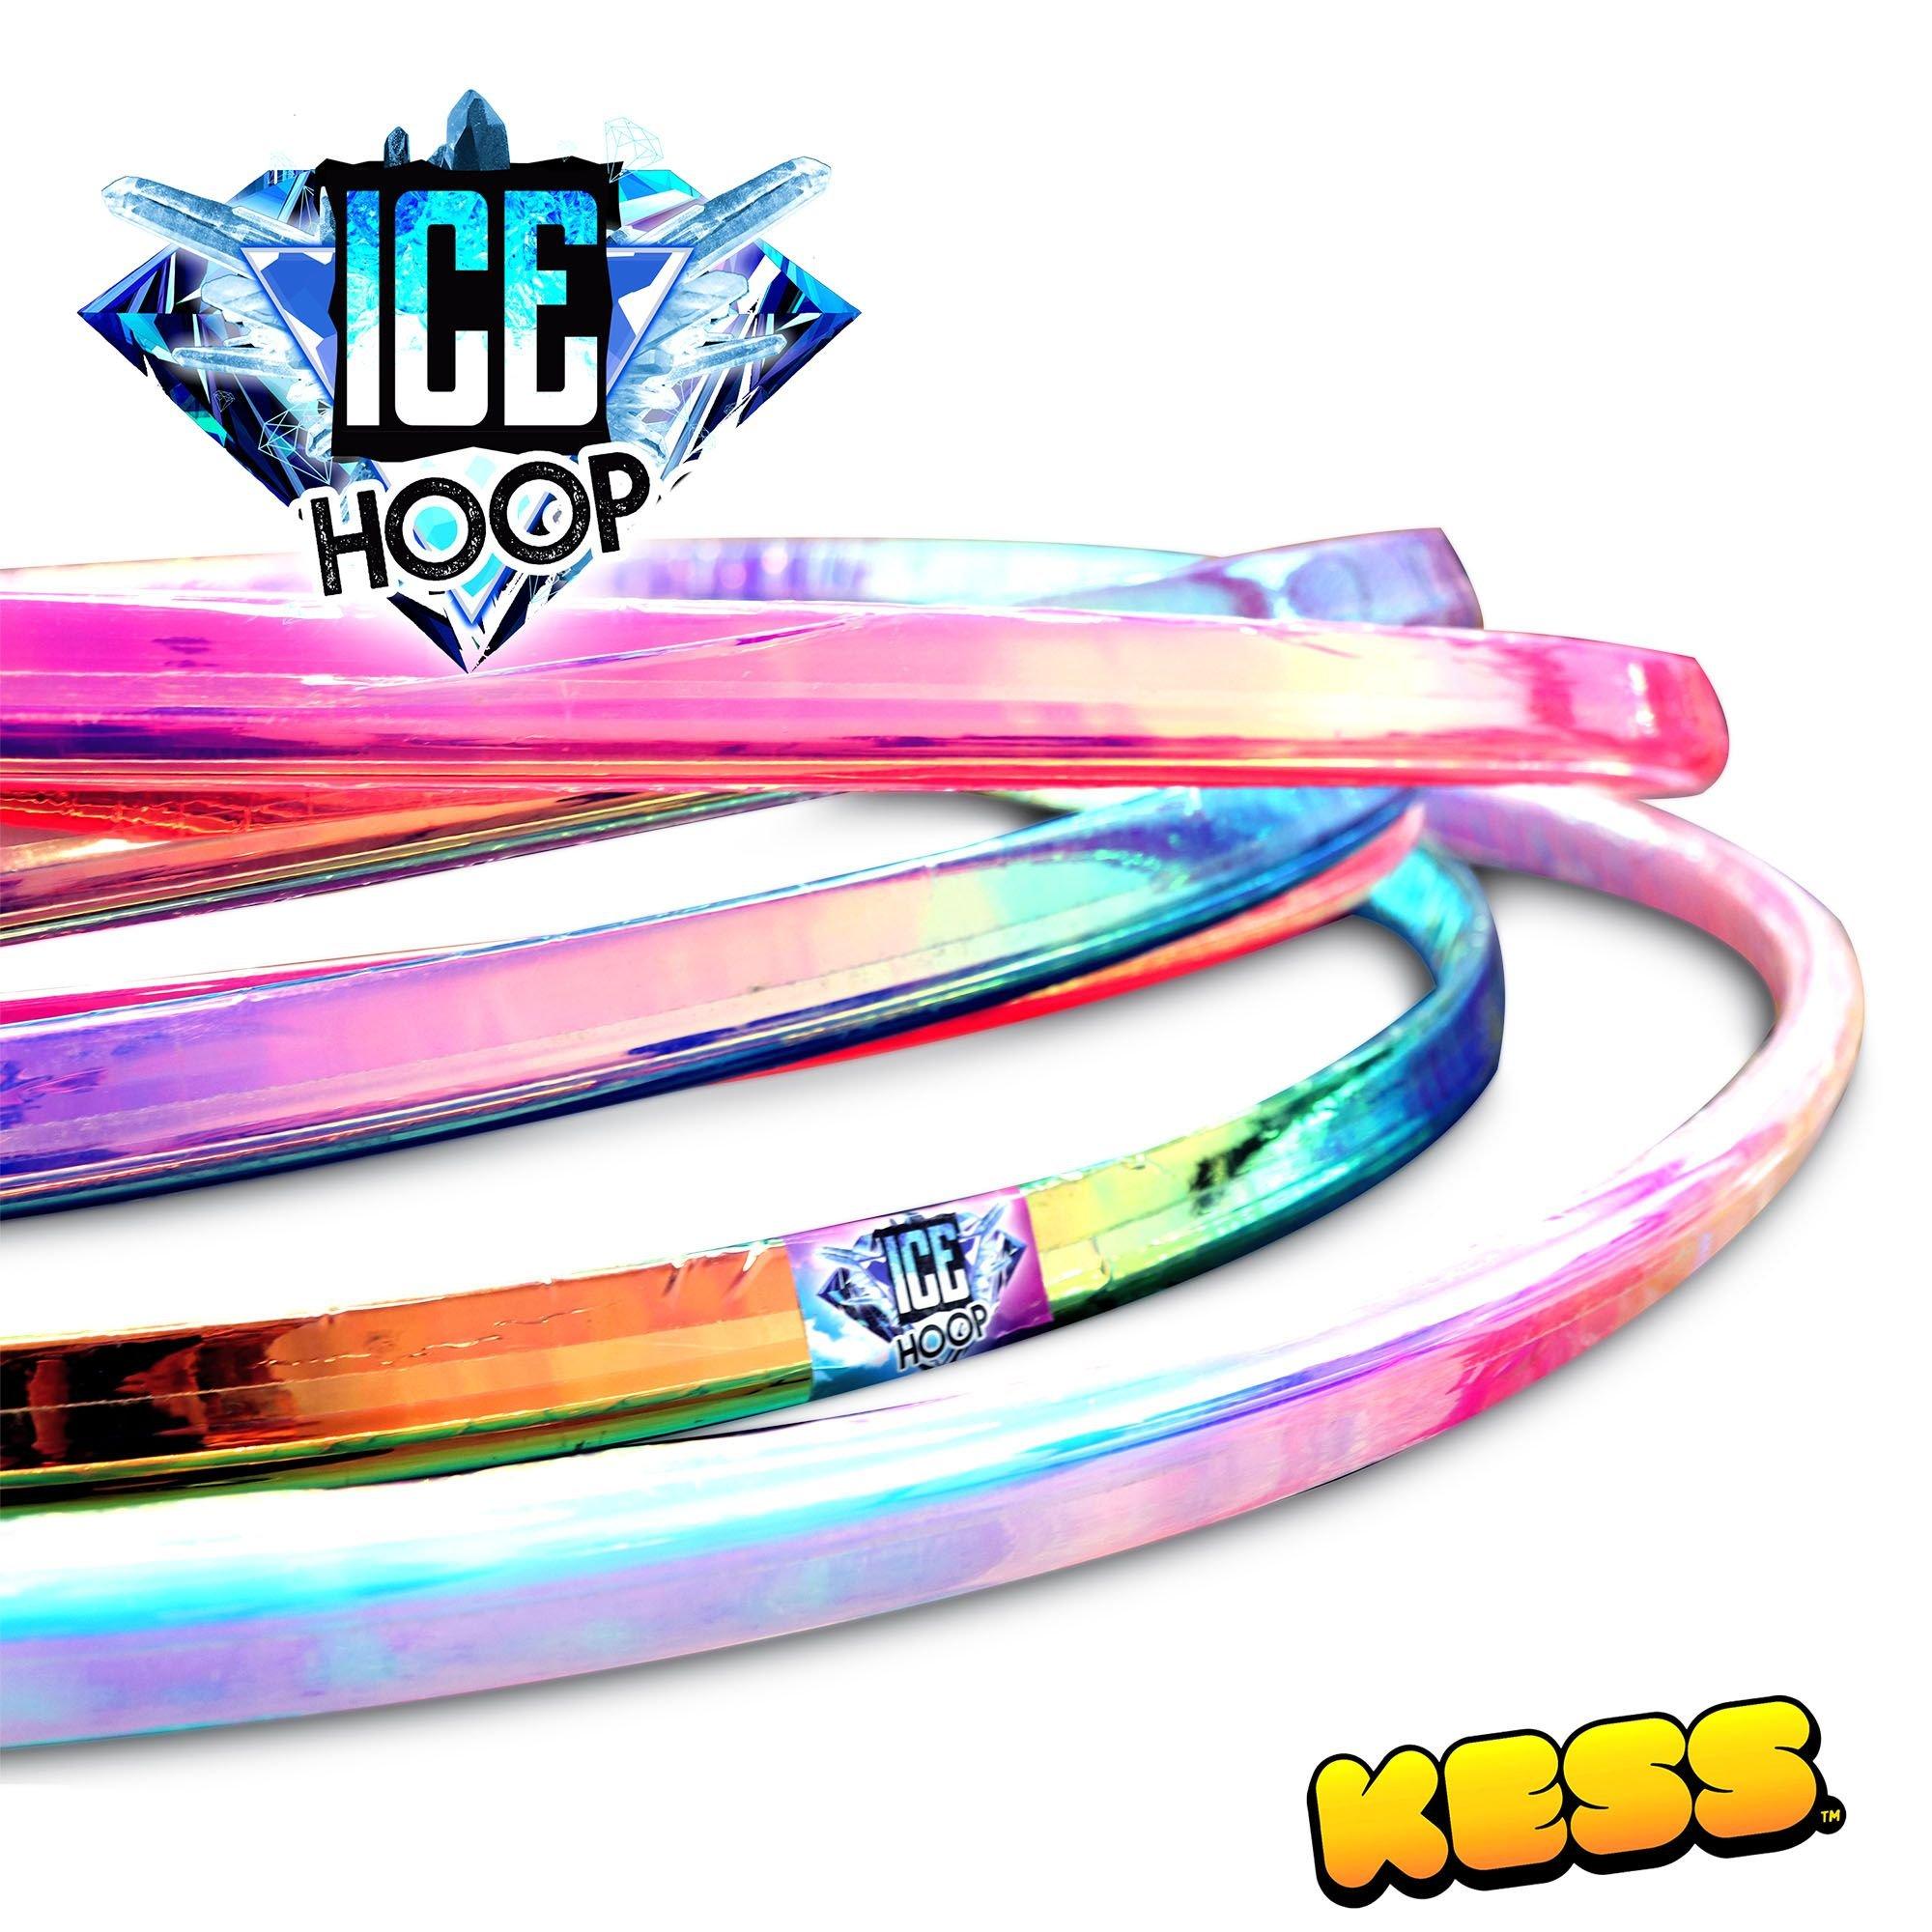 Kess Iridescent Ice Hoop Hula Hoop with V-Grip Technology, 36in